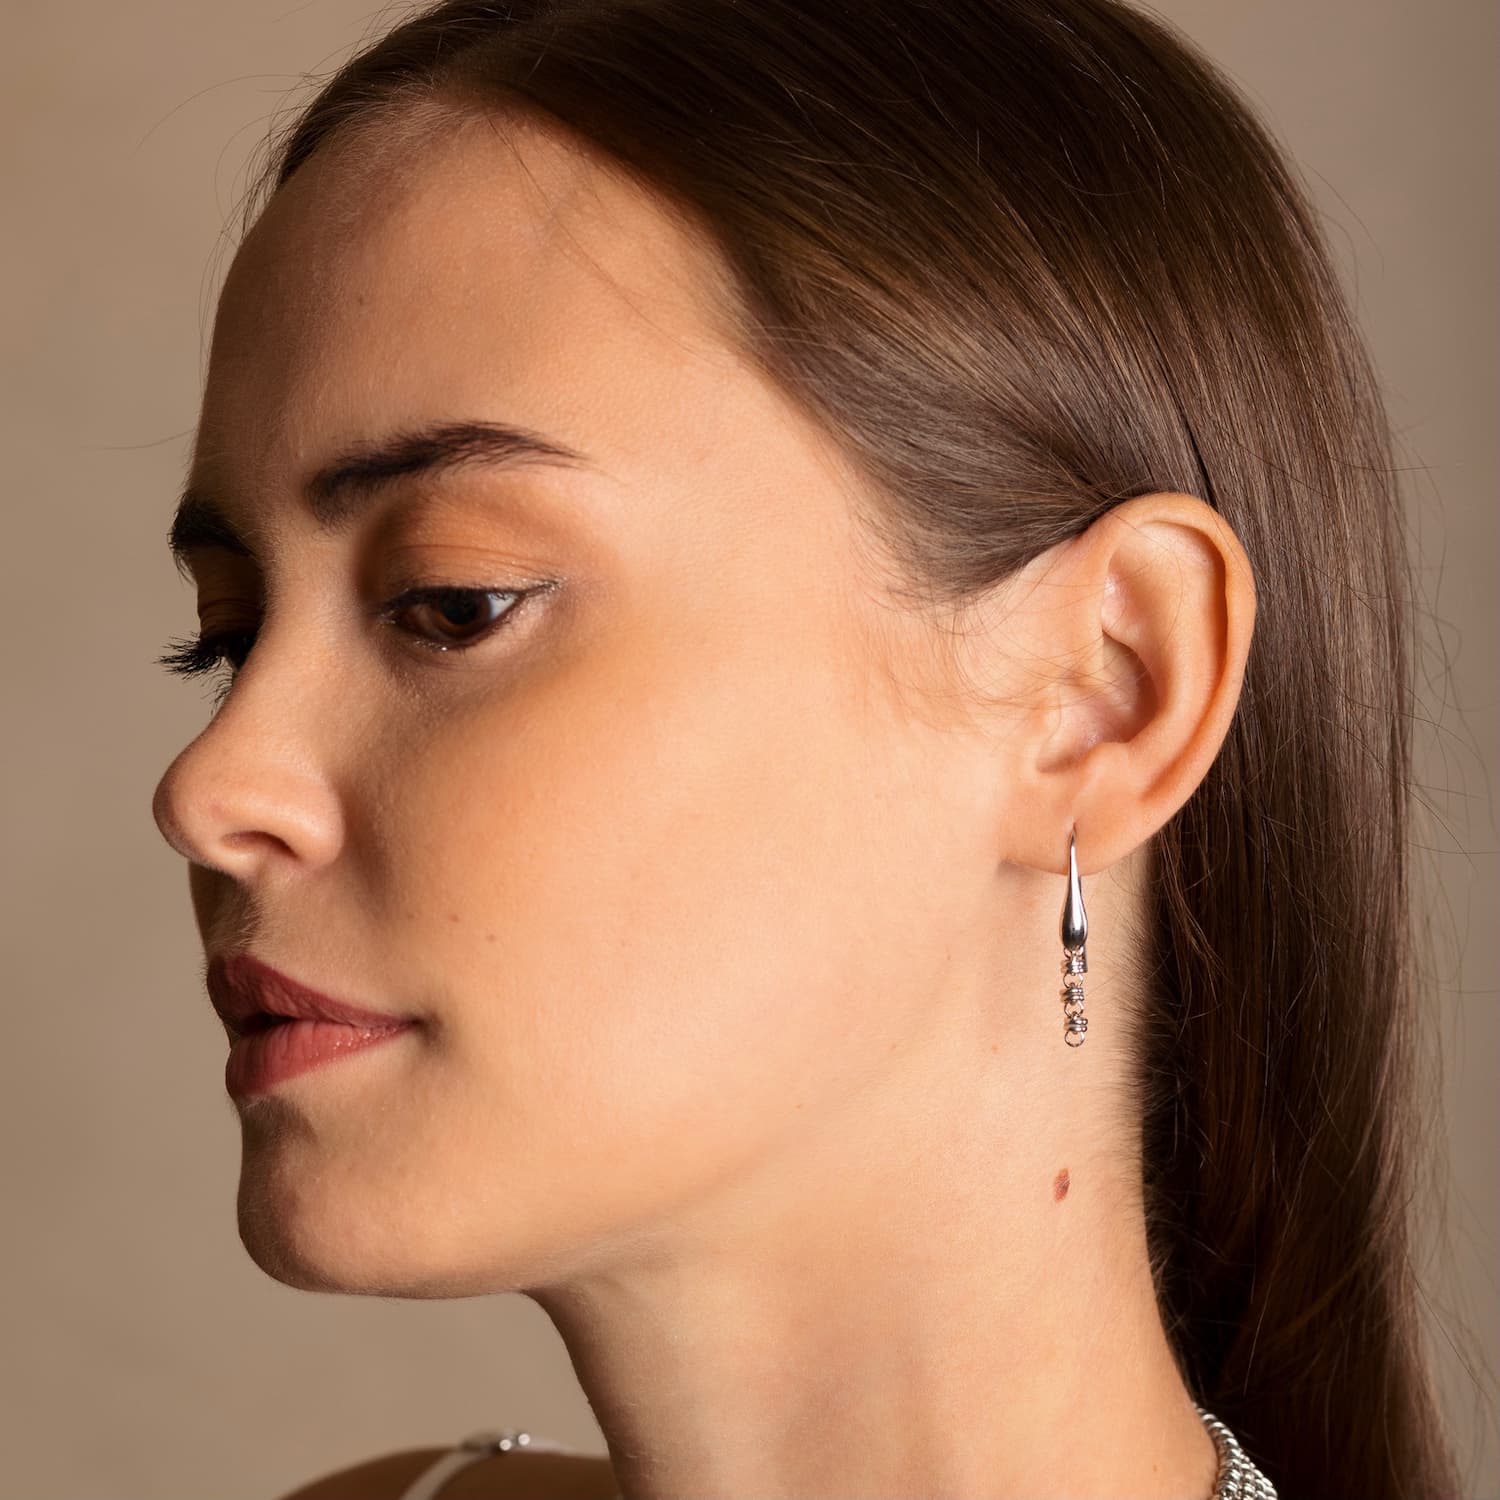 A model wearing silver chain earrings designed and hand-crafted by DelBrenna Italian Jewelers in Tuscany. The earrings and necklace shown here are designed based on the iconic Links collection of DelBrenna silver chains, necklaces, rings, and bracelets.